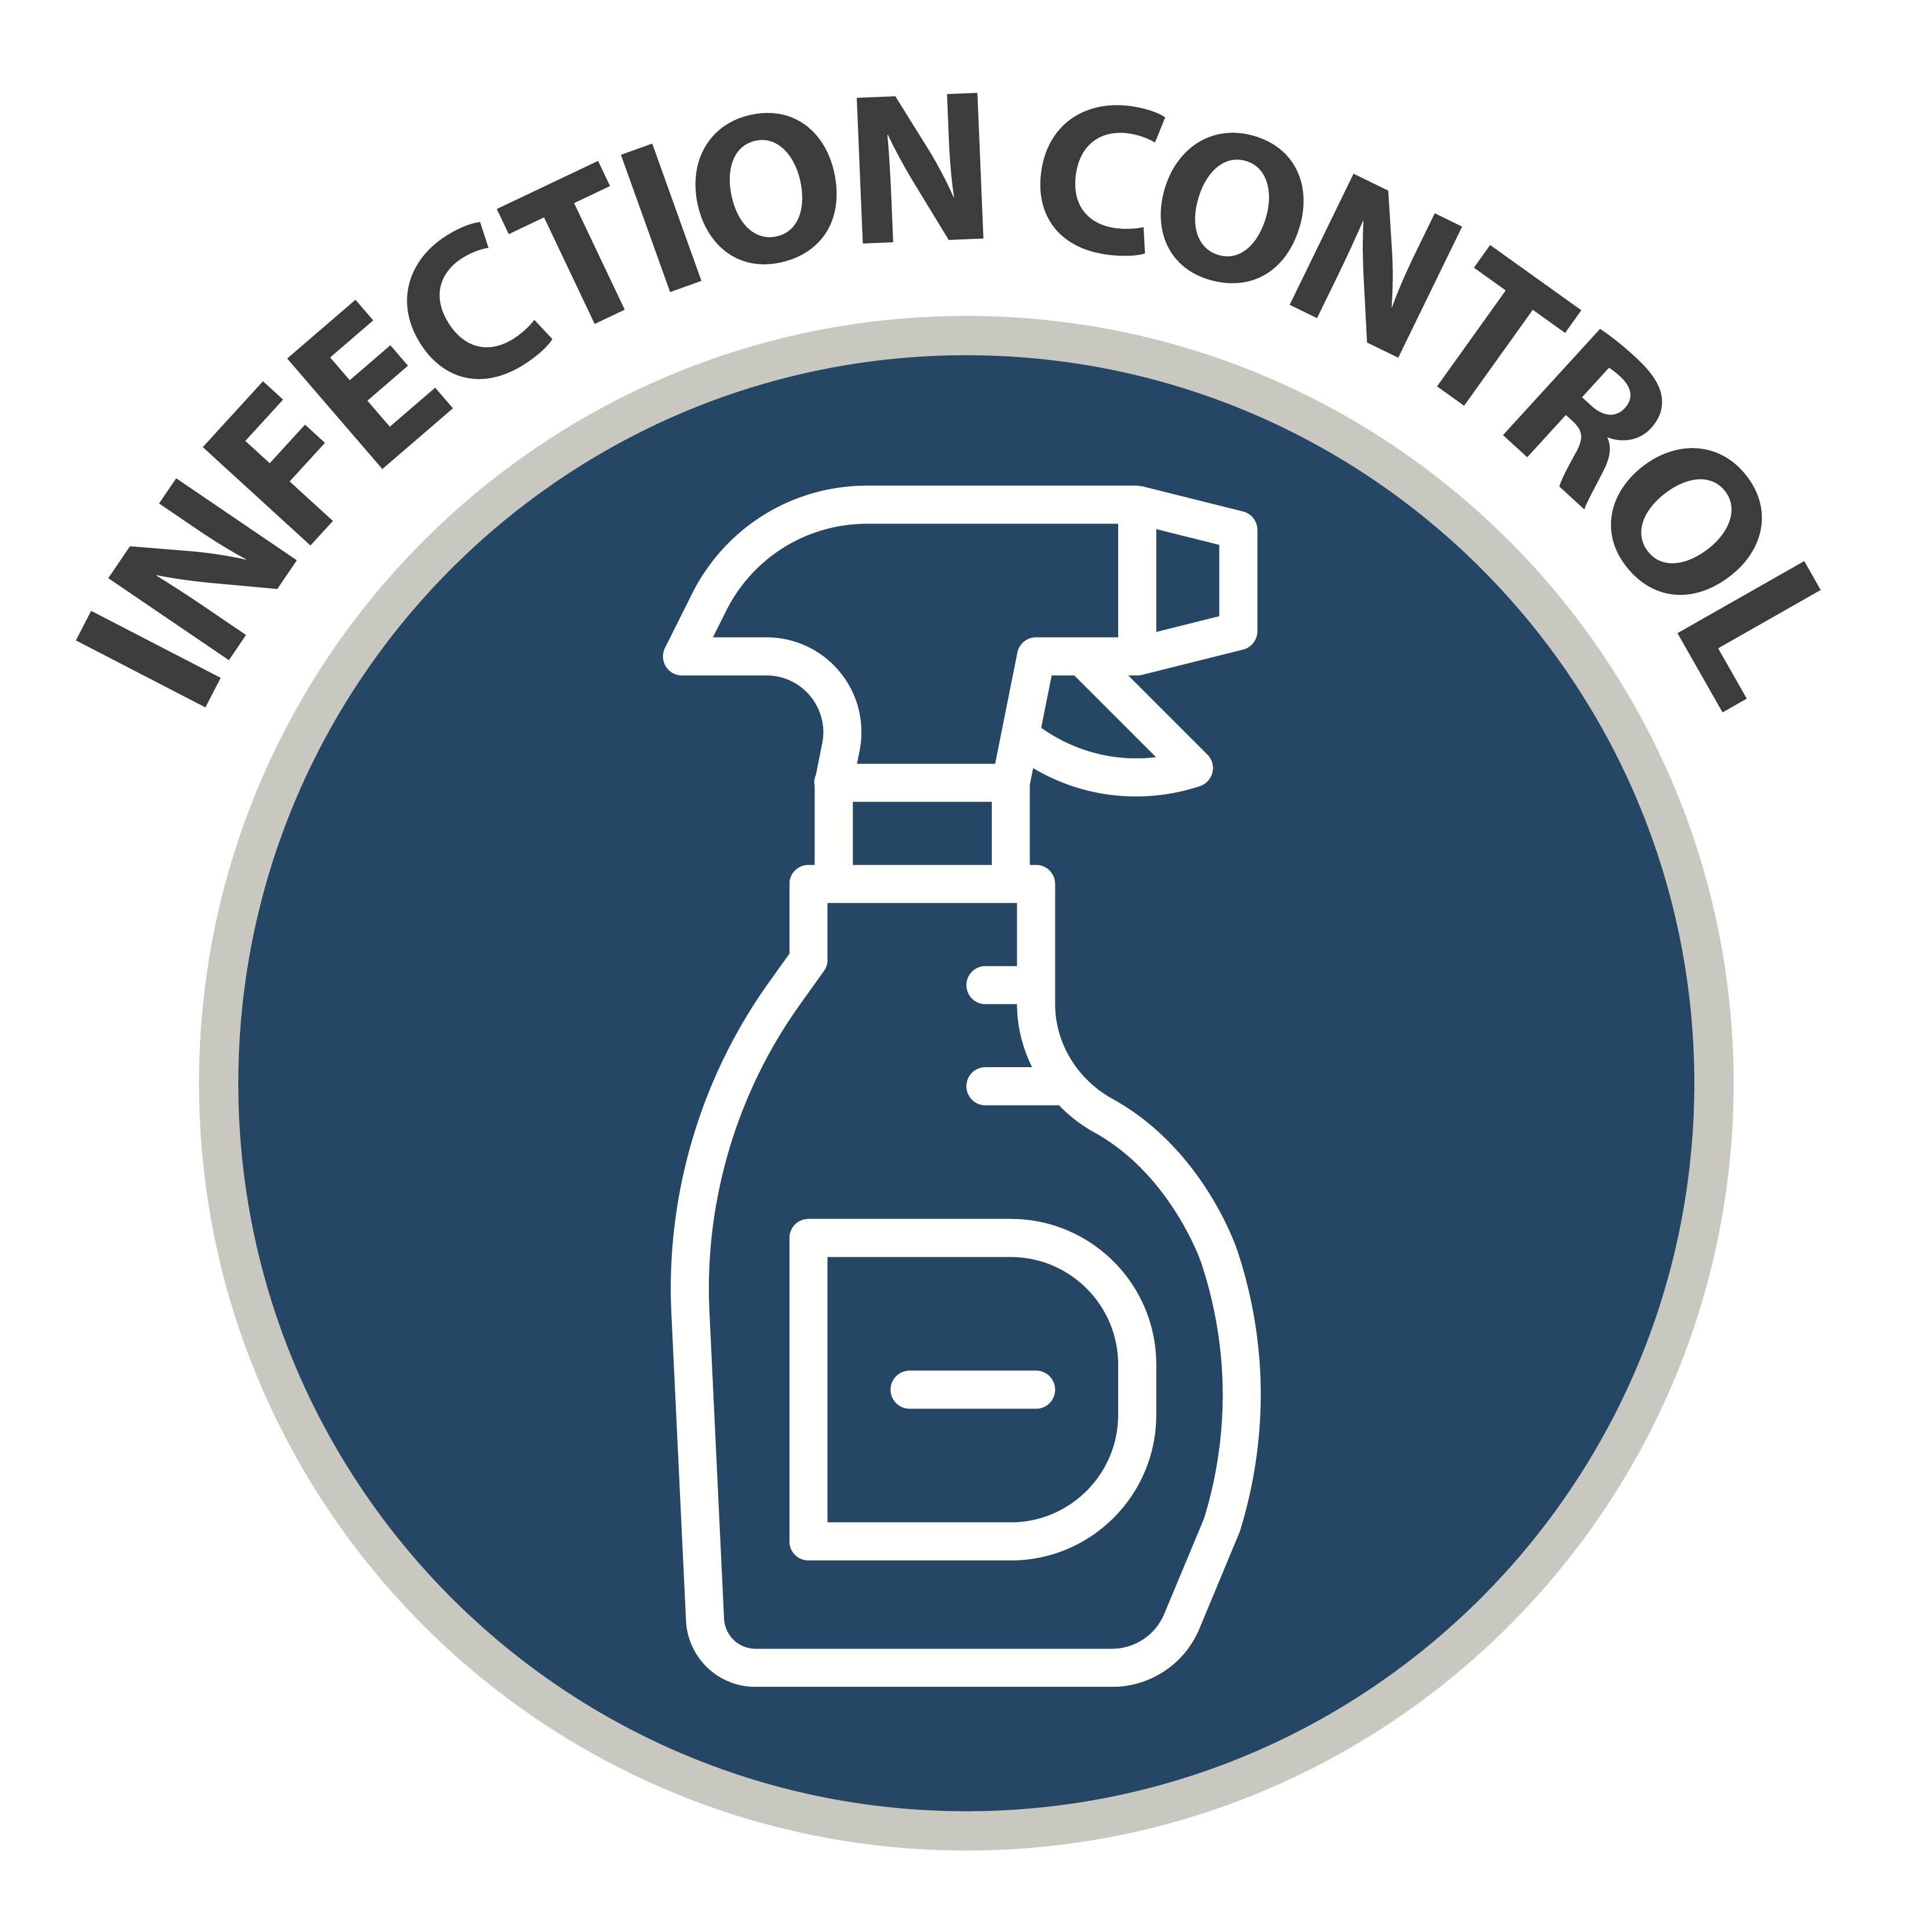 Infection Control - icon of spray bottle